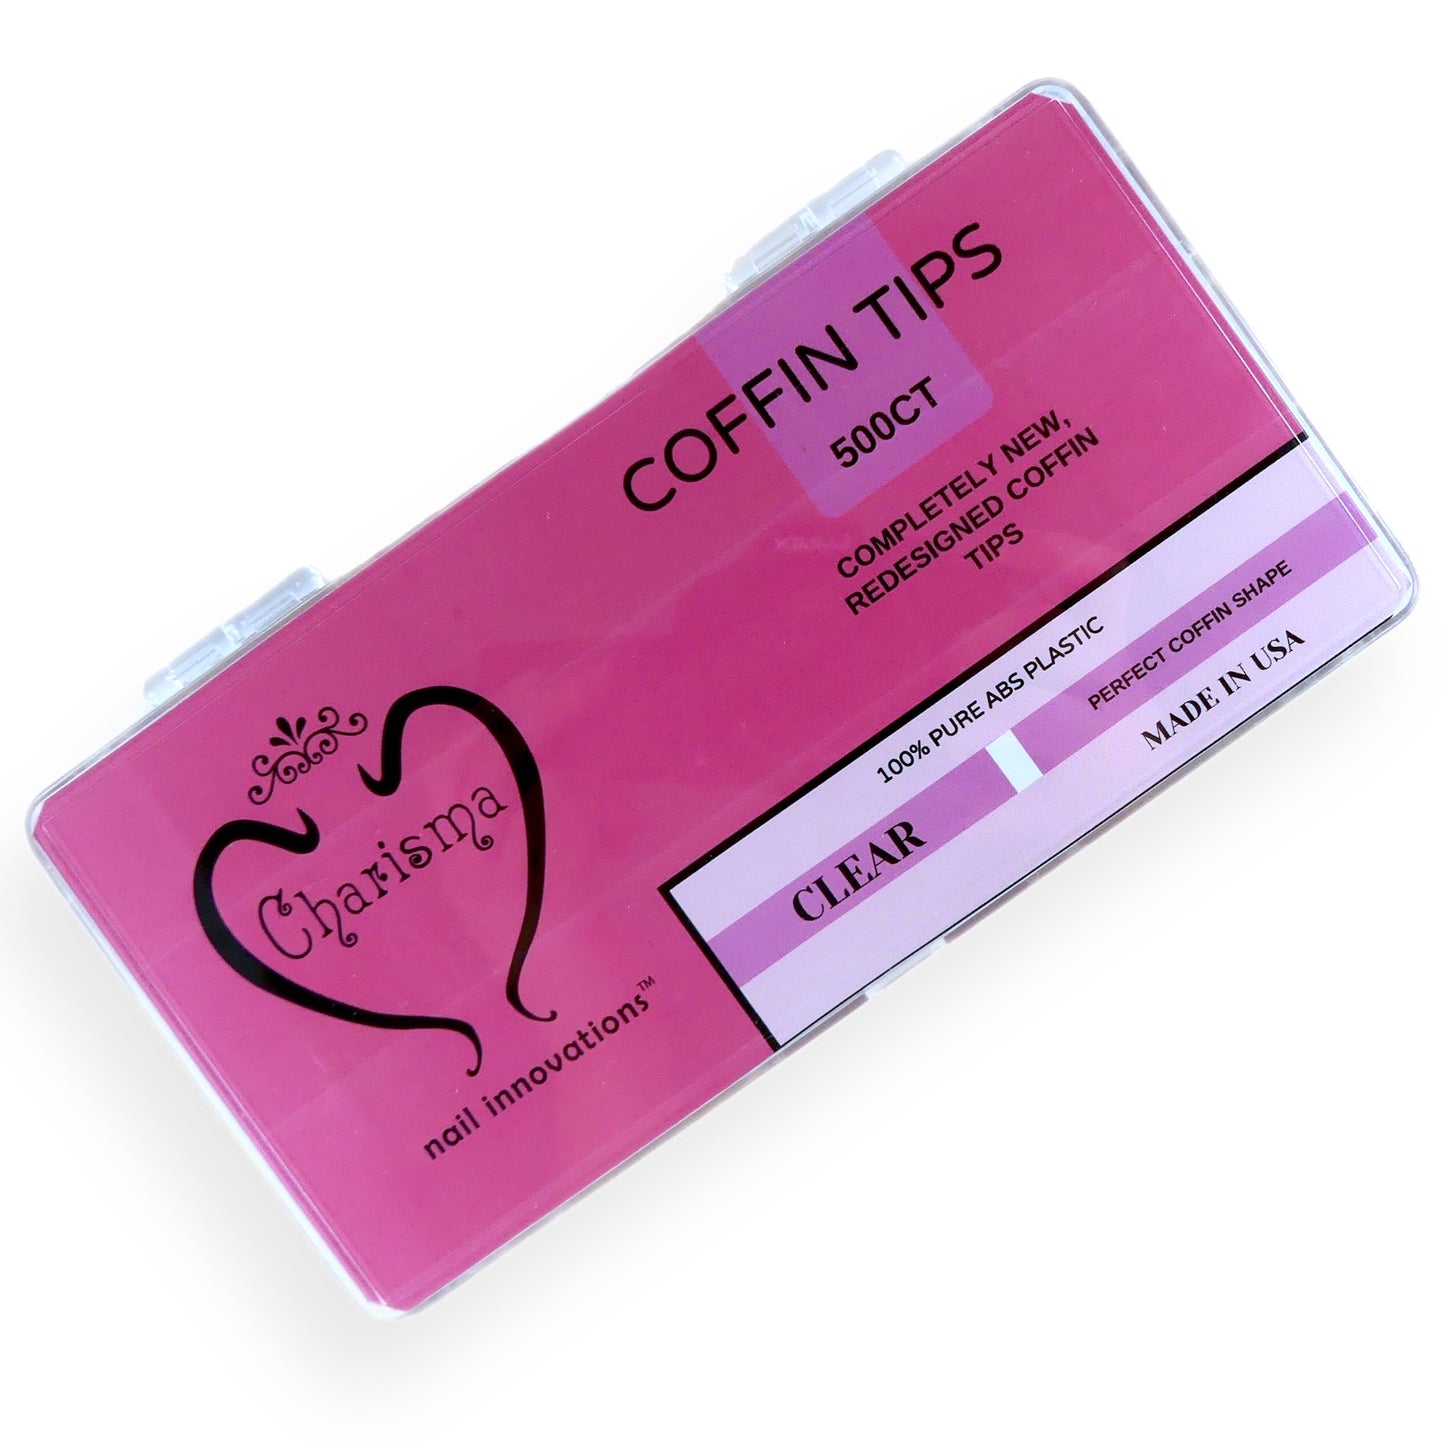 Coffin Press On Clear Tips, 500ct / 10 sizes - My Little Nail Art Shop